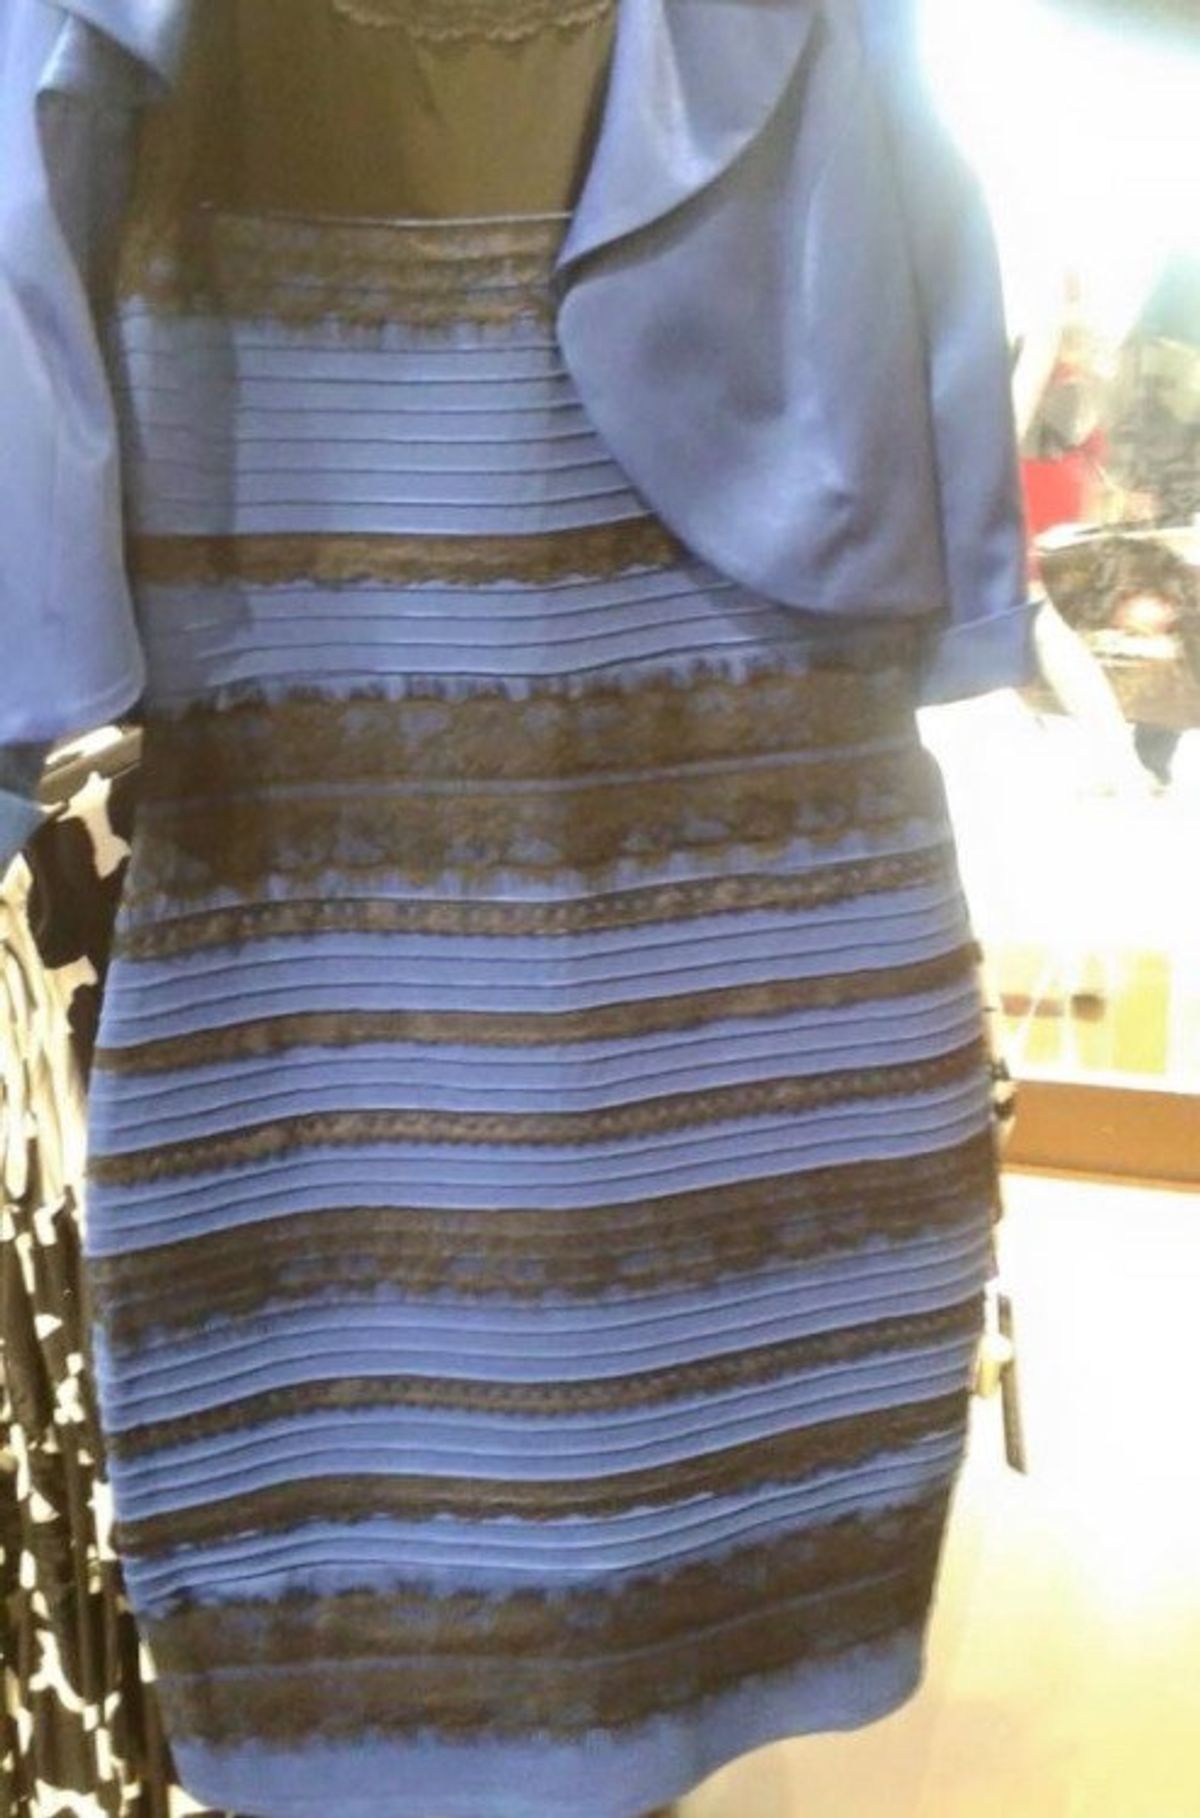 The Great Debate: What Colors Do YOU See in This Dress?